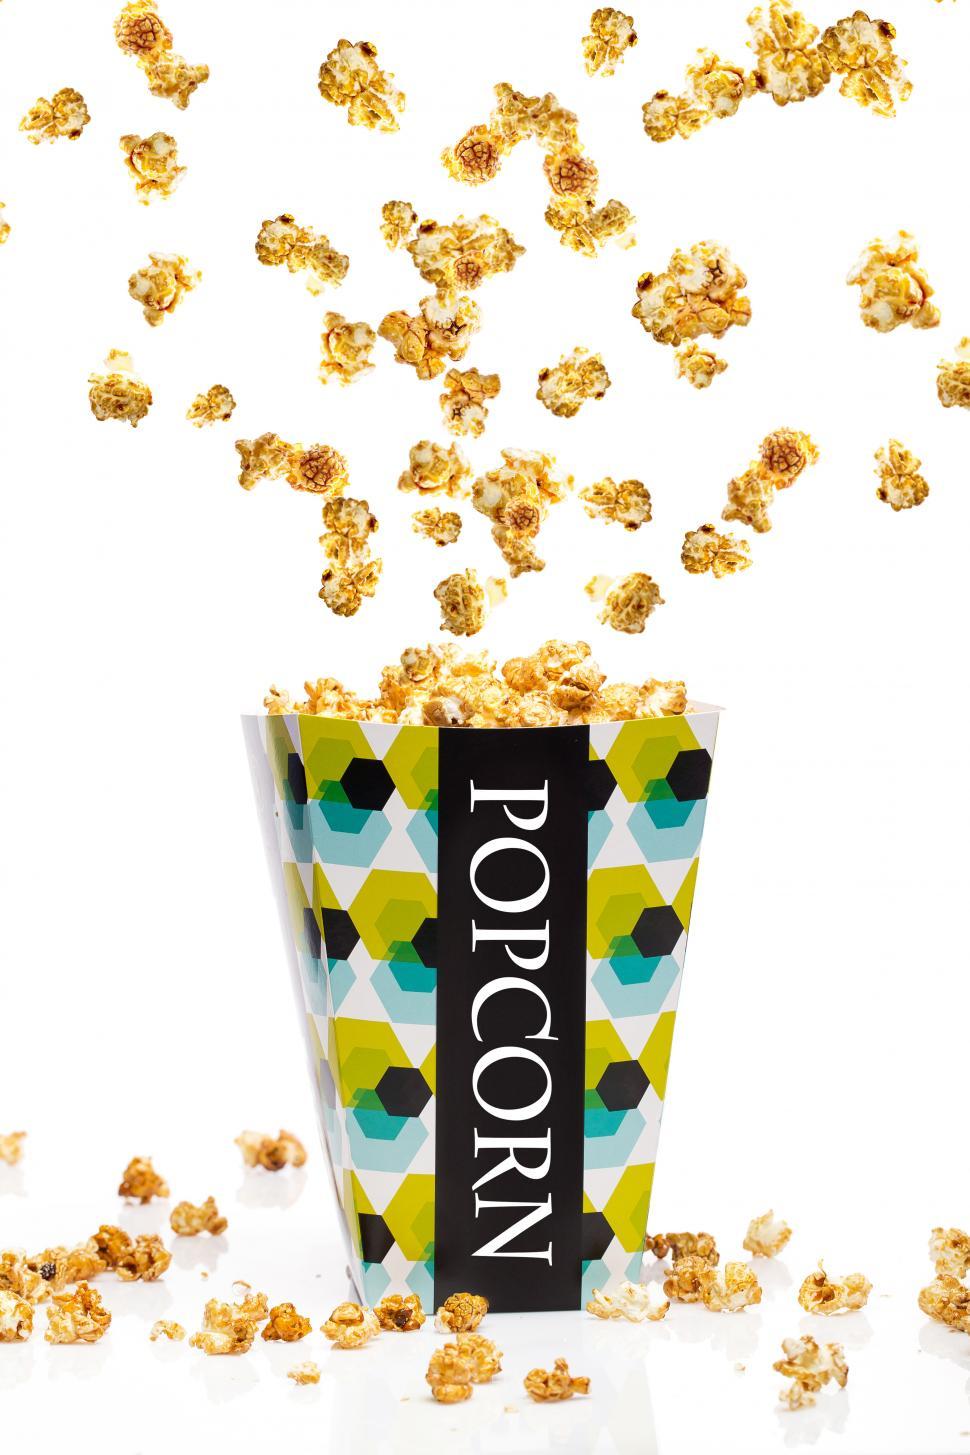 Free Image of Container of delicious popcorn 